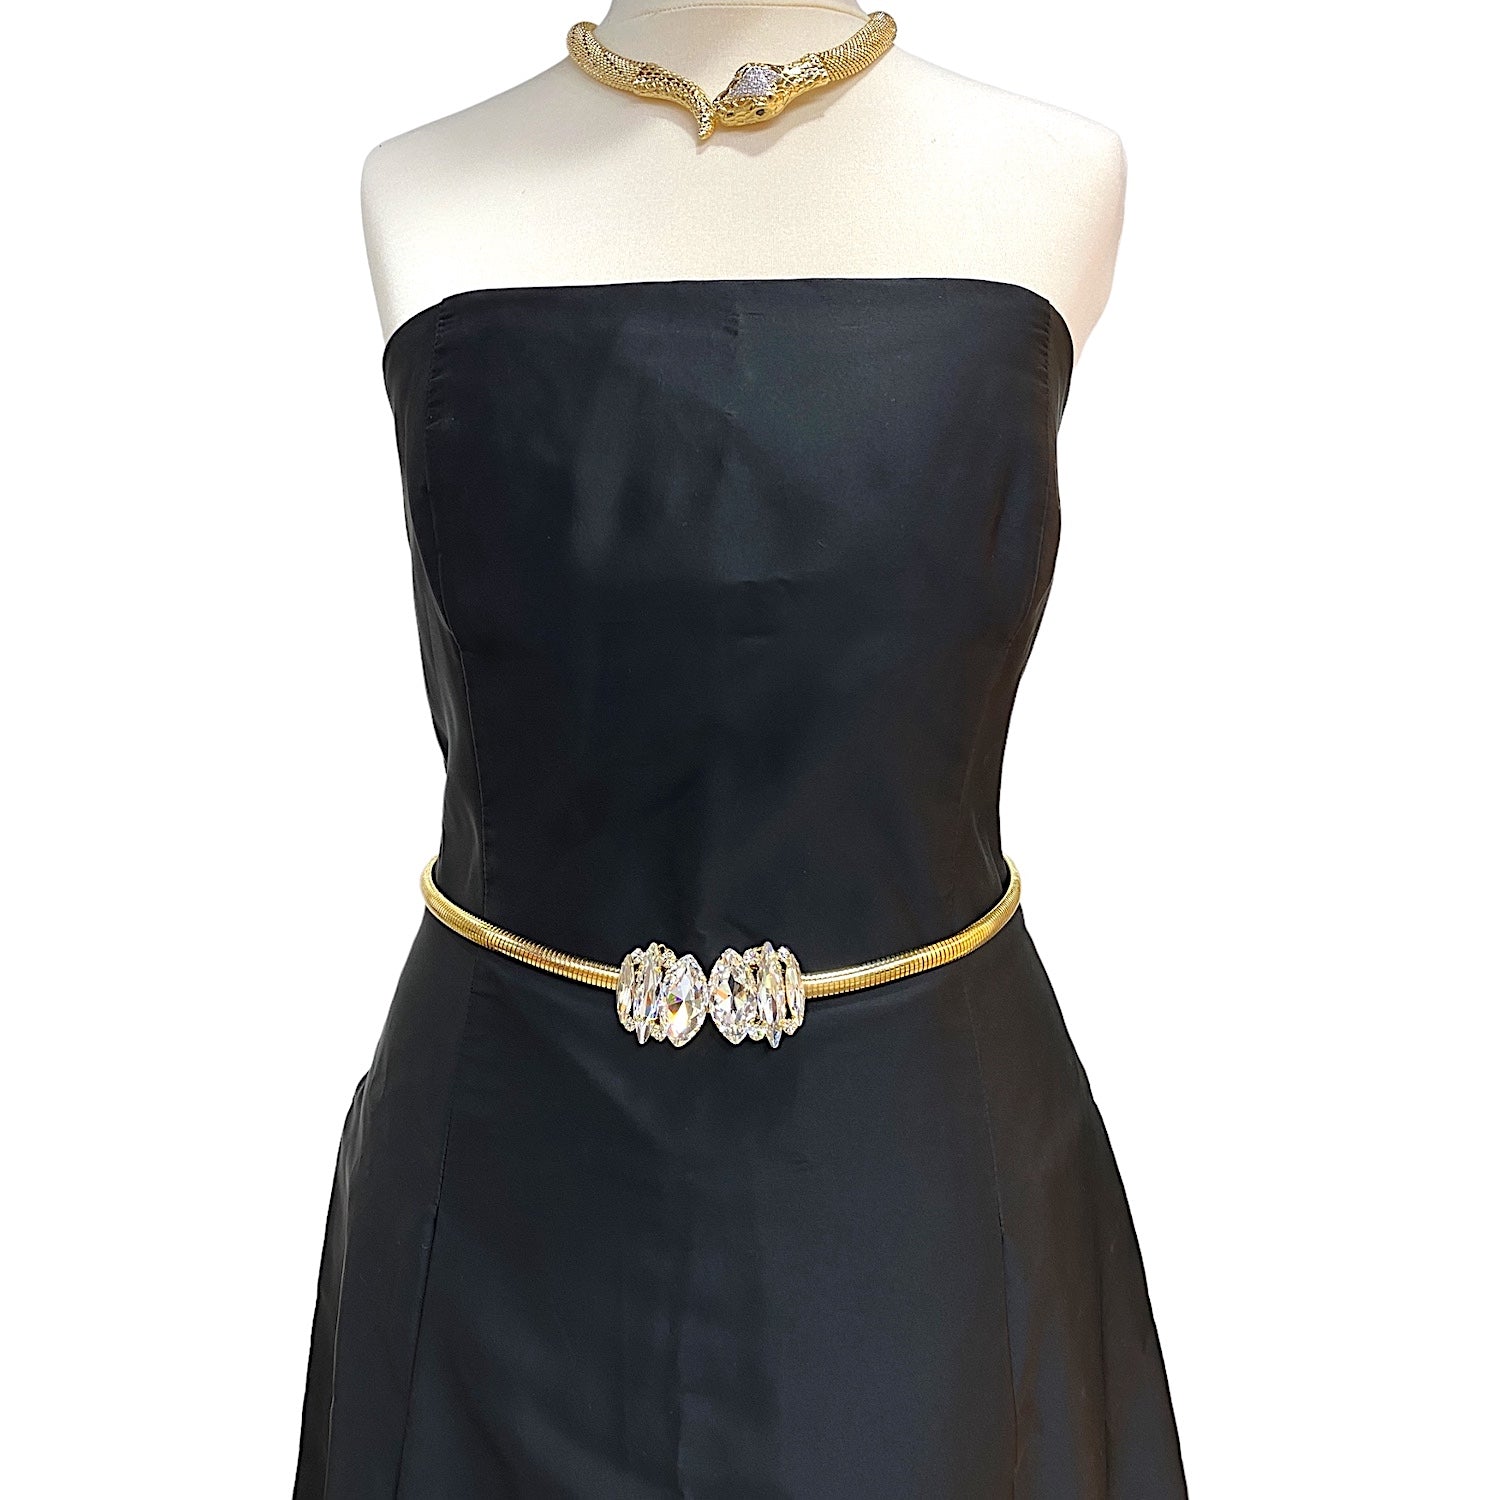 Matilde belt in gold plated metal  with  crystal buckle